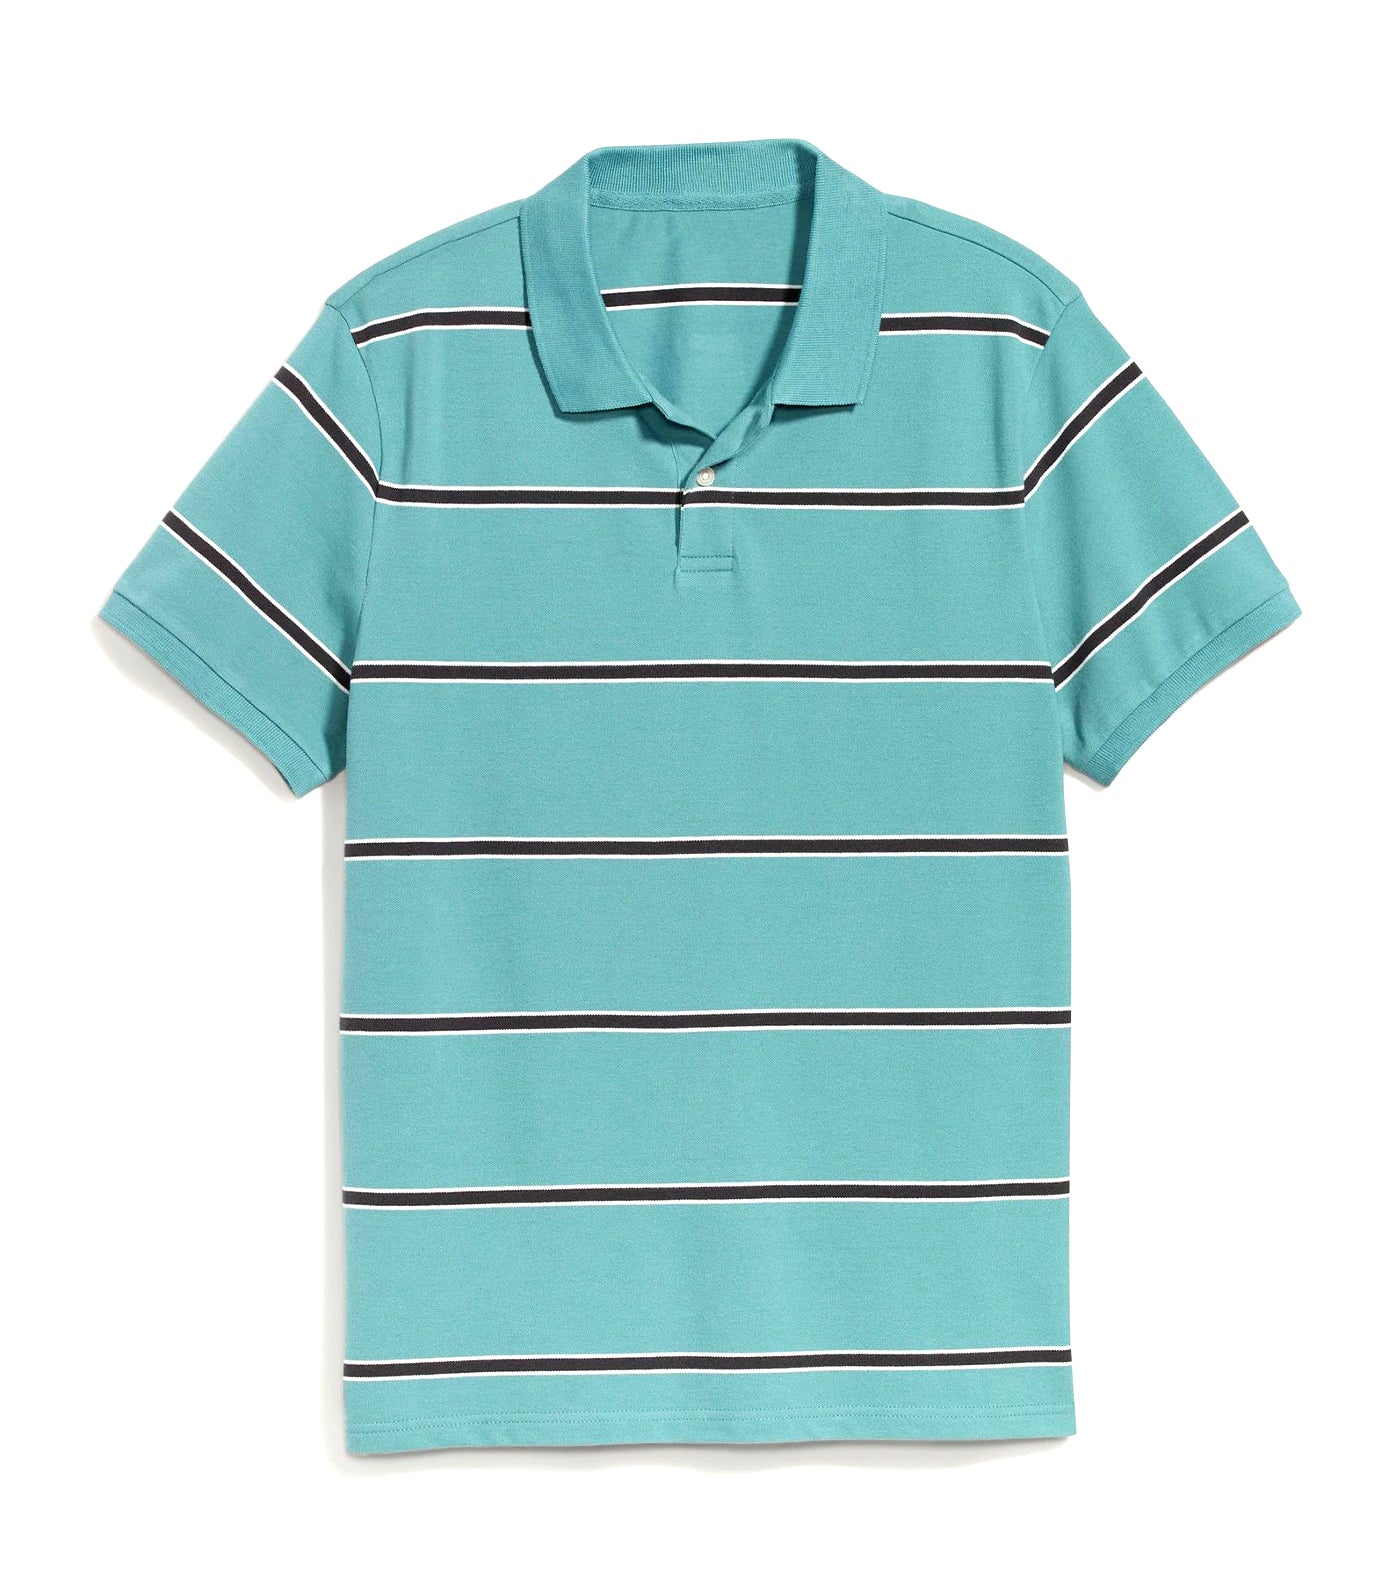 Moisture-Wicking Striped Pique Pro Polo Shirt for Men Darkwater Teal